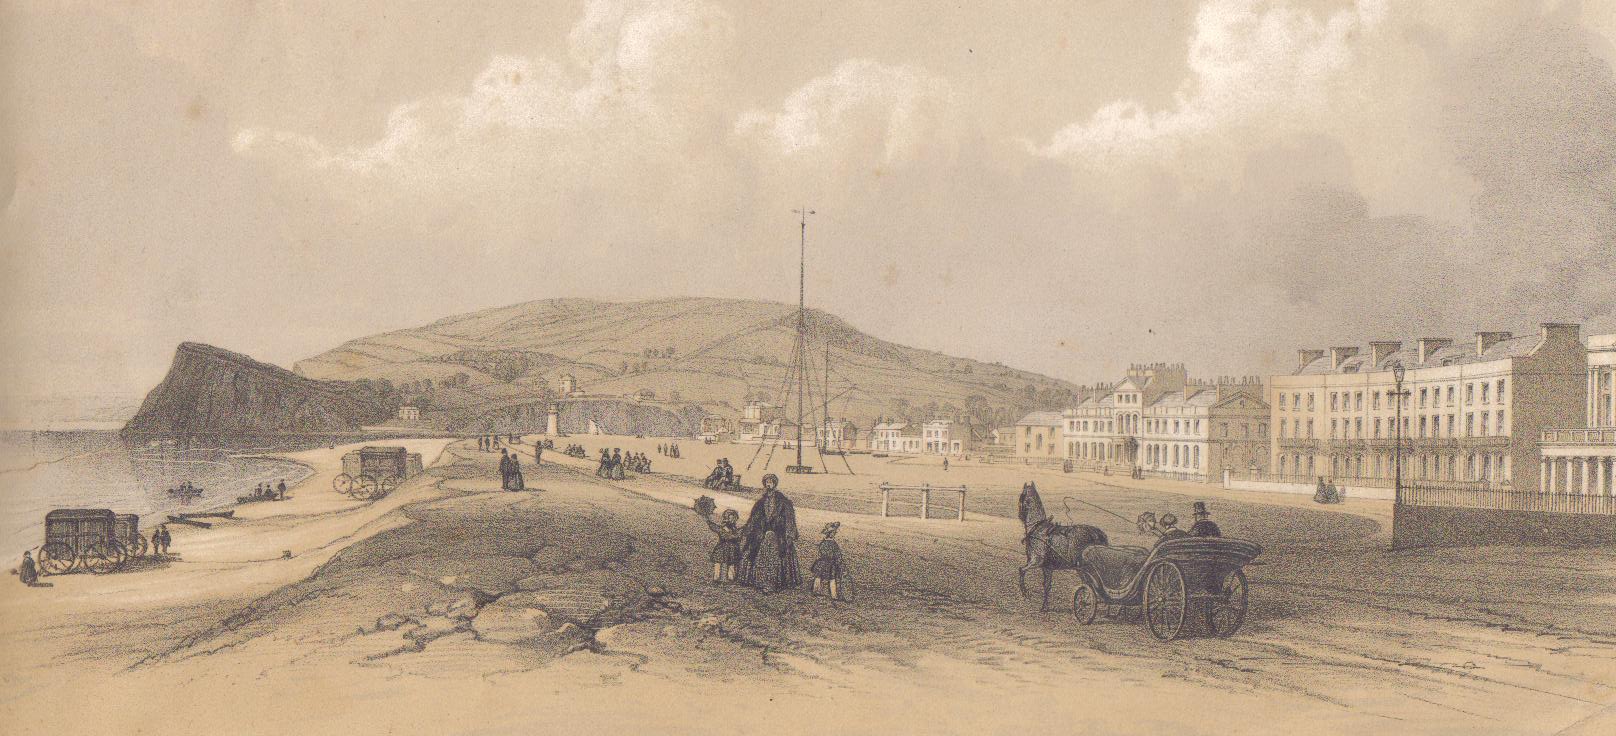 Teignmouth, early nineteenth century. Click to enlarge.